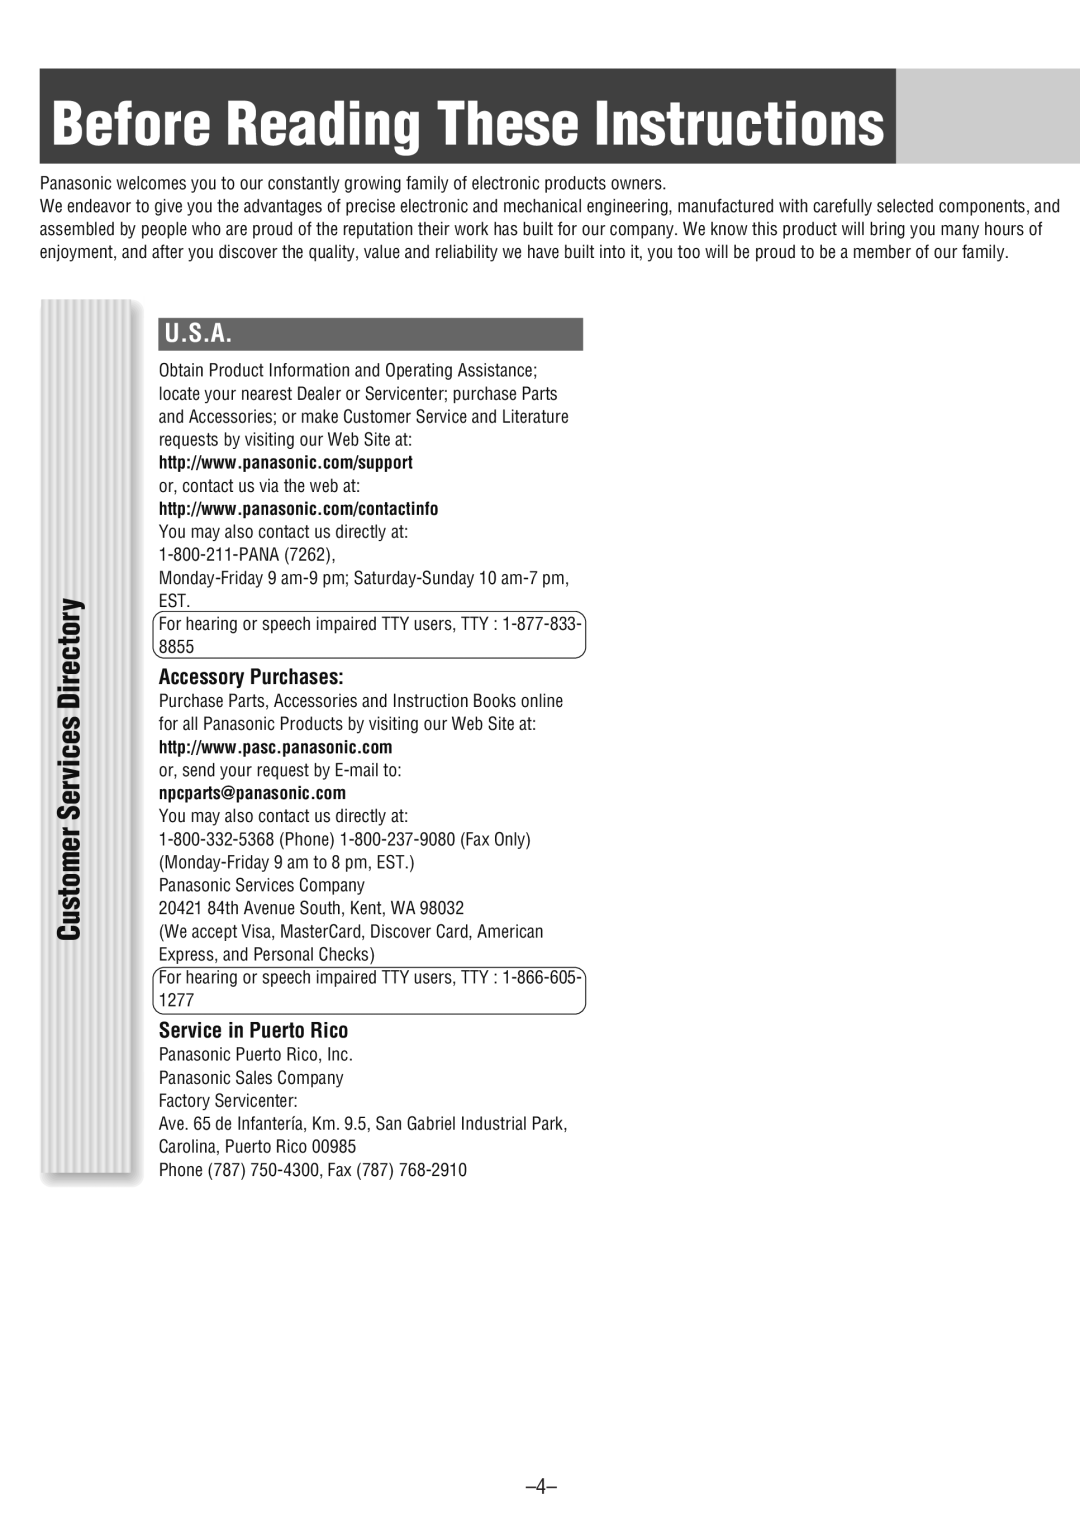 Panasonic CQ-CM130U warranty Before Reading These Instructions, Customer Services Directory, U.S.A, Accessory Purchases 